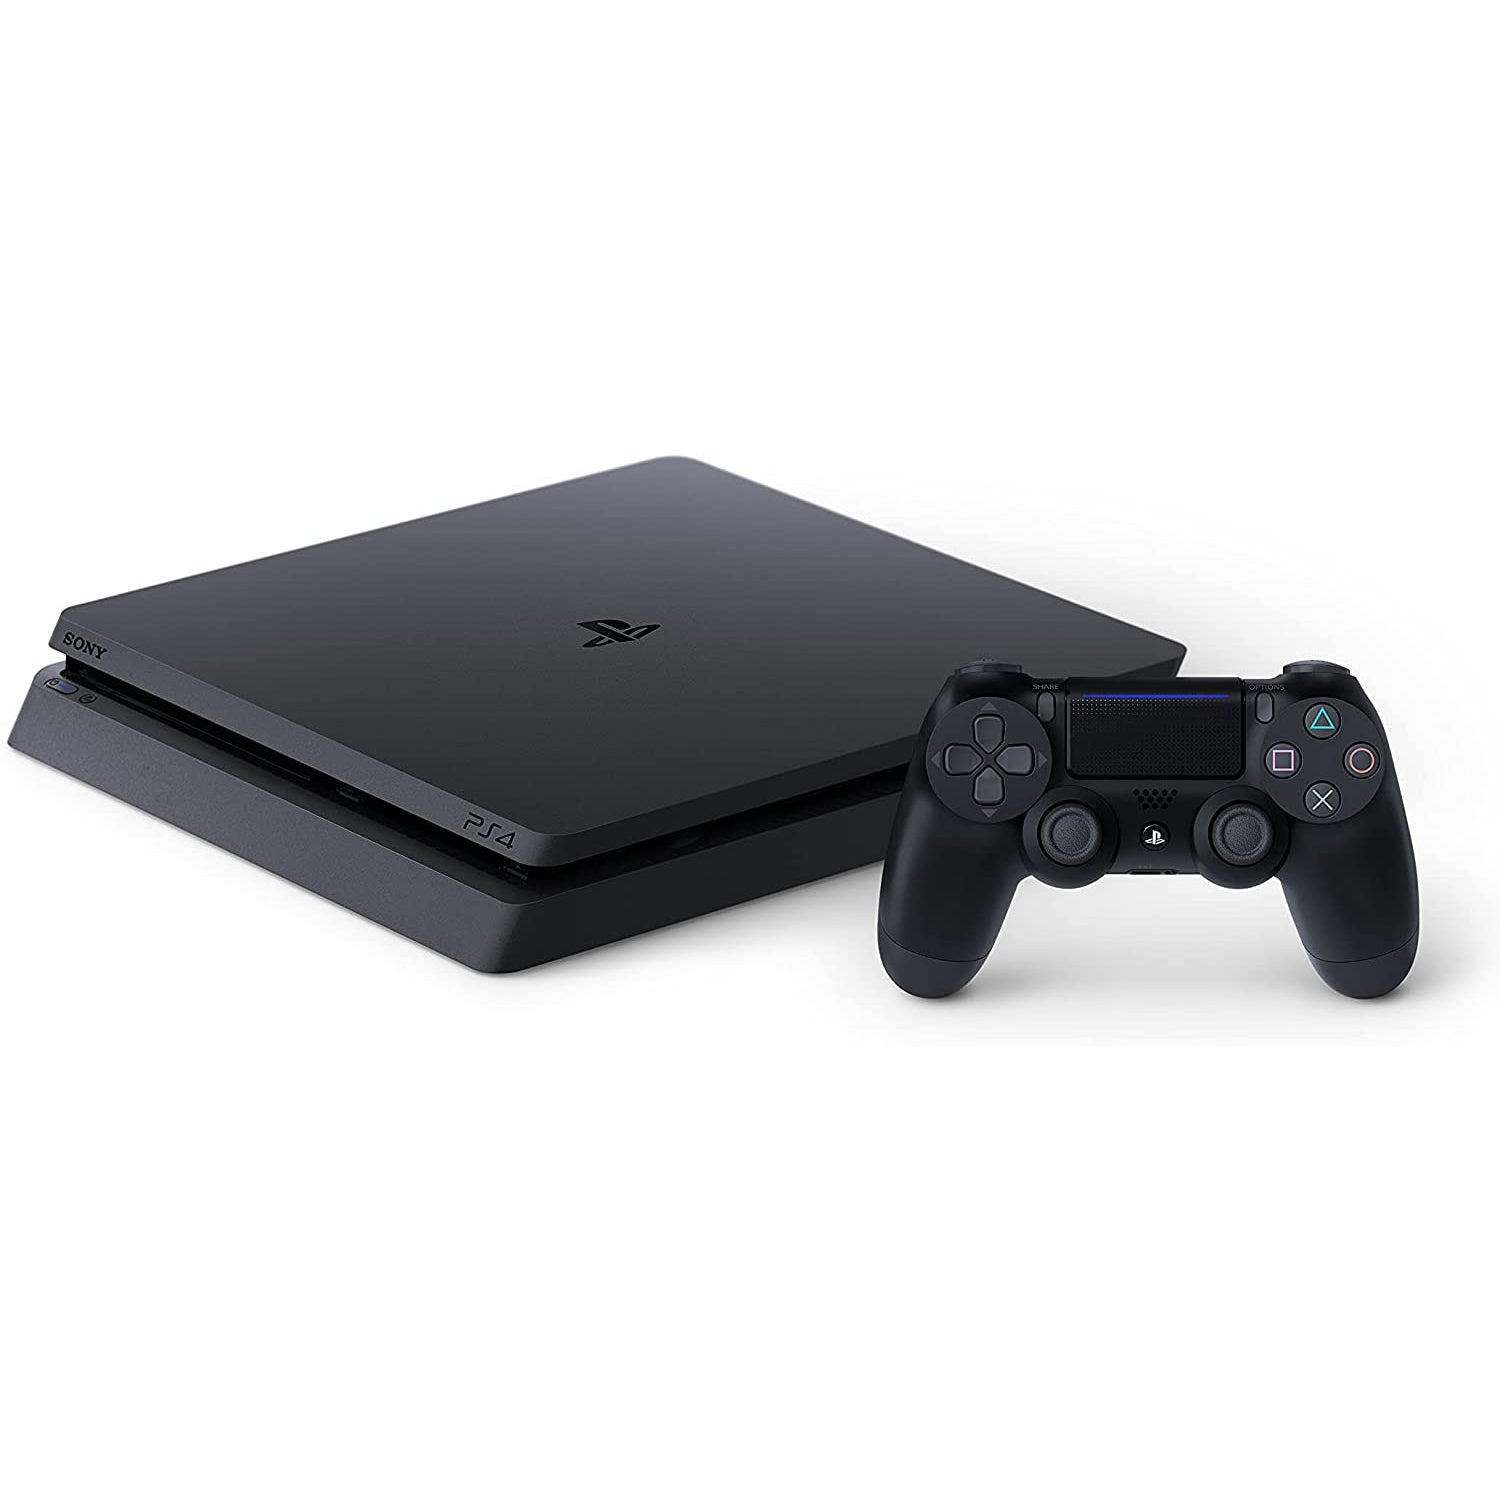 Sony PlayStation 4 Slim Console - 500GB - Refurbished Pristine - With Controller